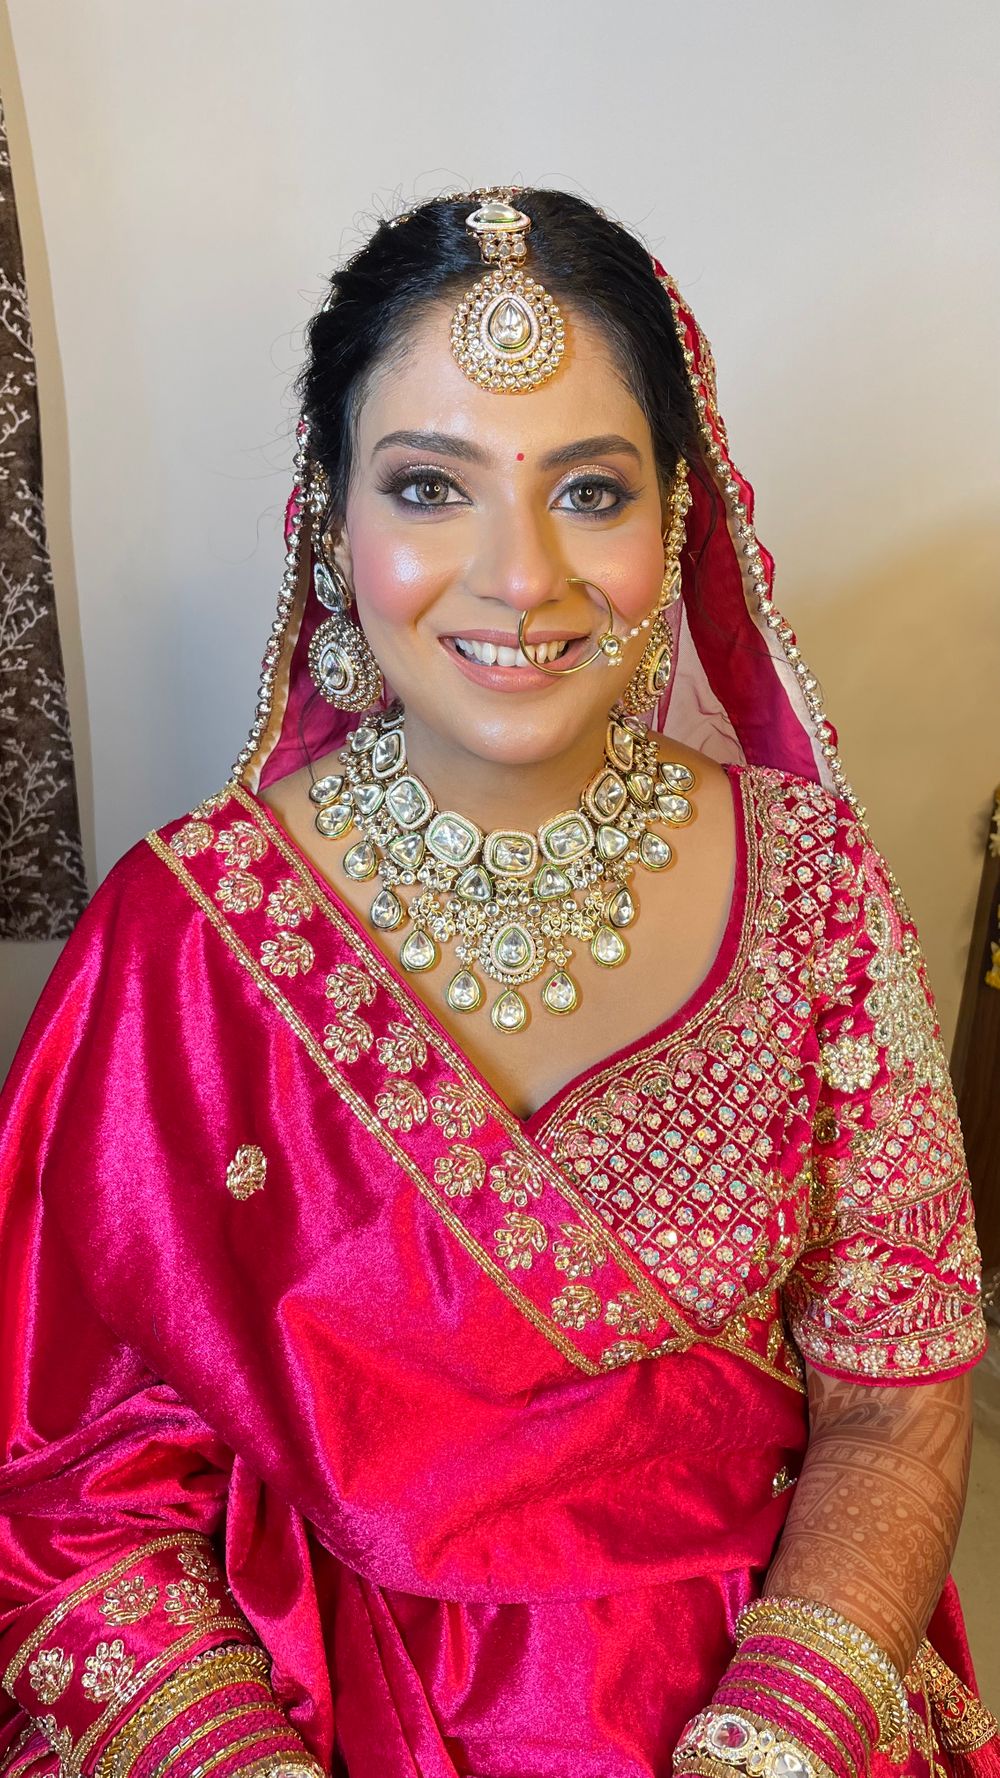 Photo From Bride  - By Makeovers by Anju